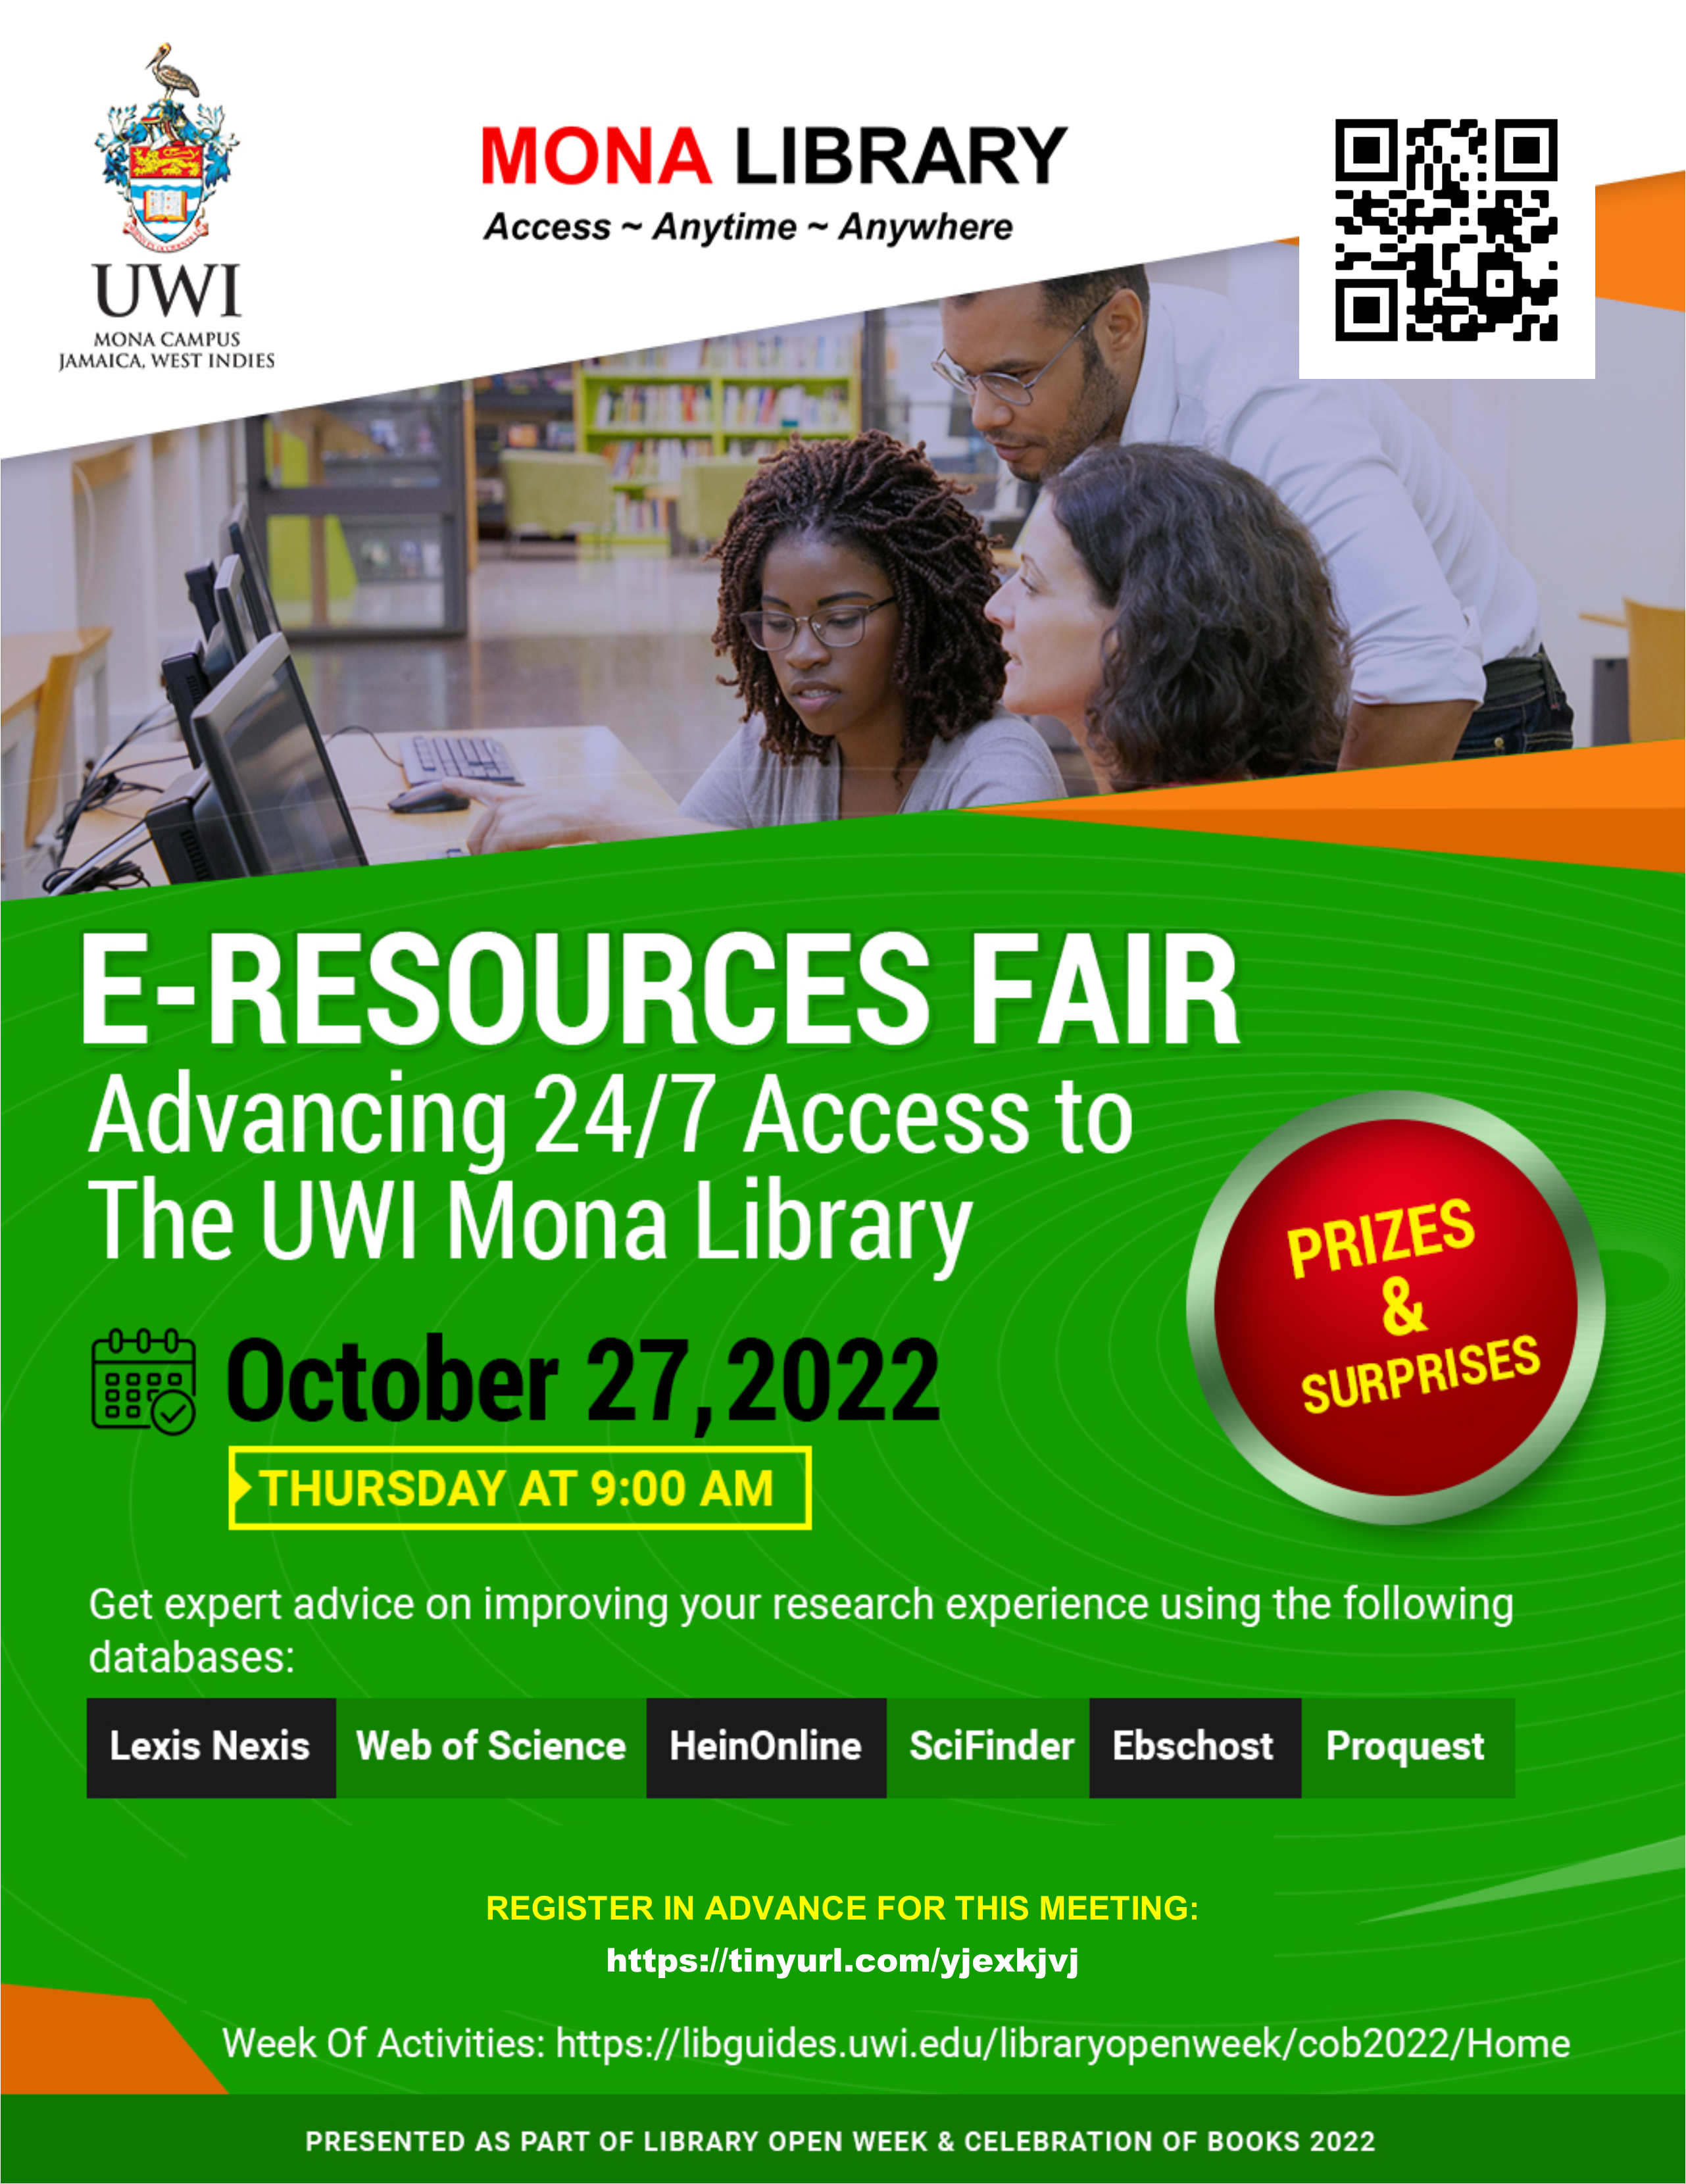 E-Resources Fair: Advancing 24/7 Access to The UWI Mona Library | The UWI Mona Library Open Week